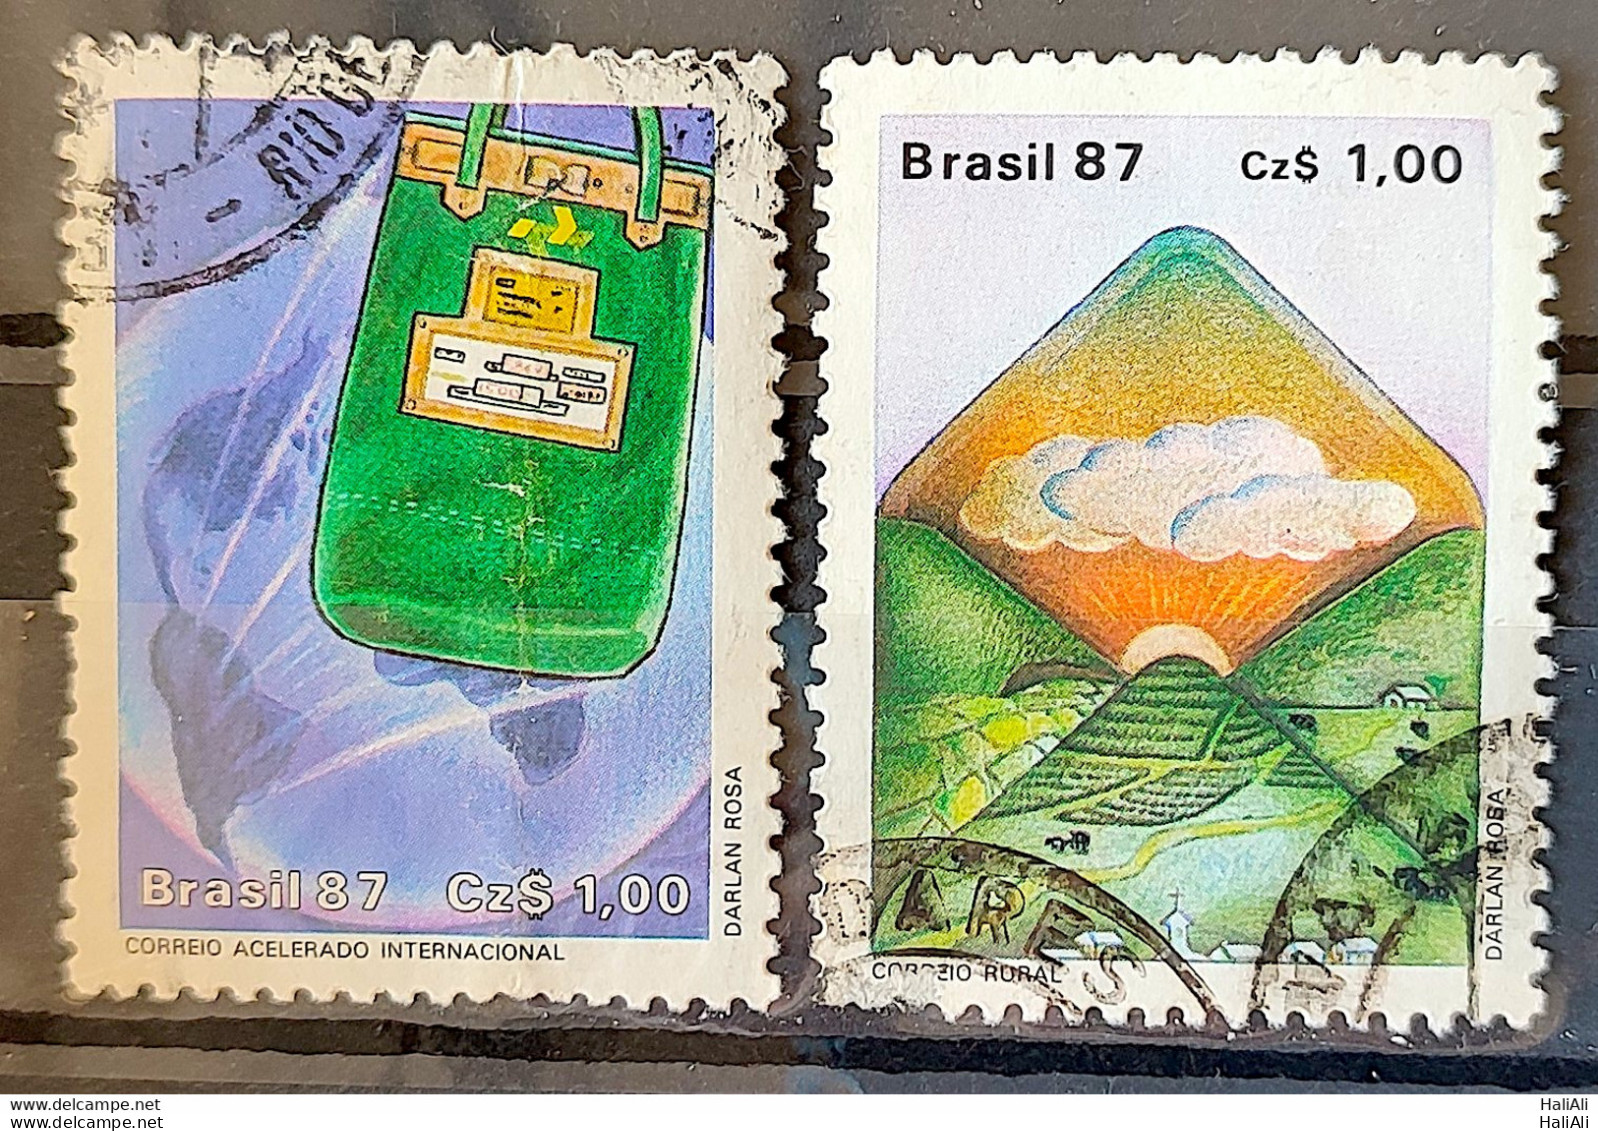 C 1545 Brazil Stamp Postal Service Malote Letter 1987 Complete Series Circulated 5 - Oblitérés